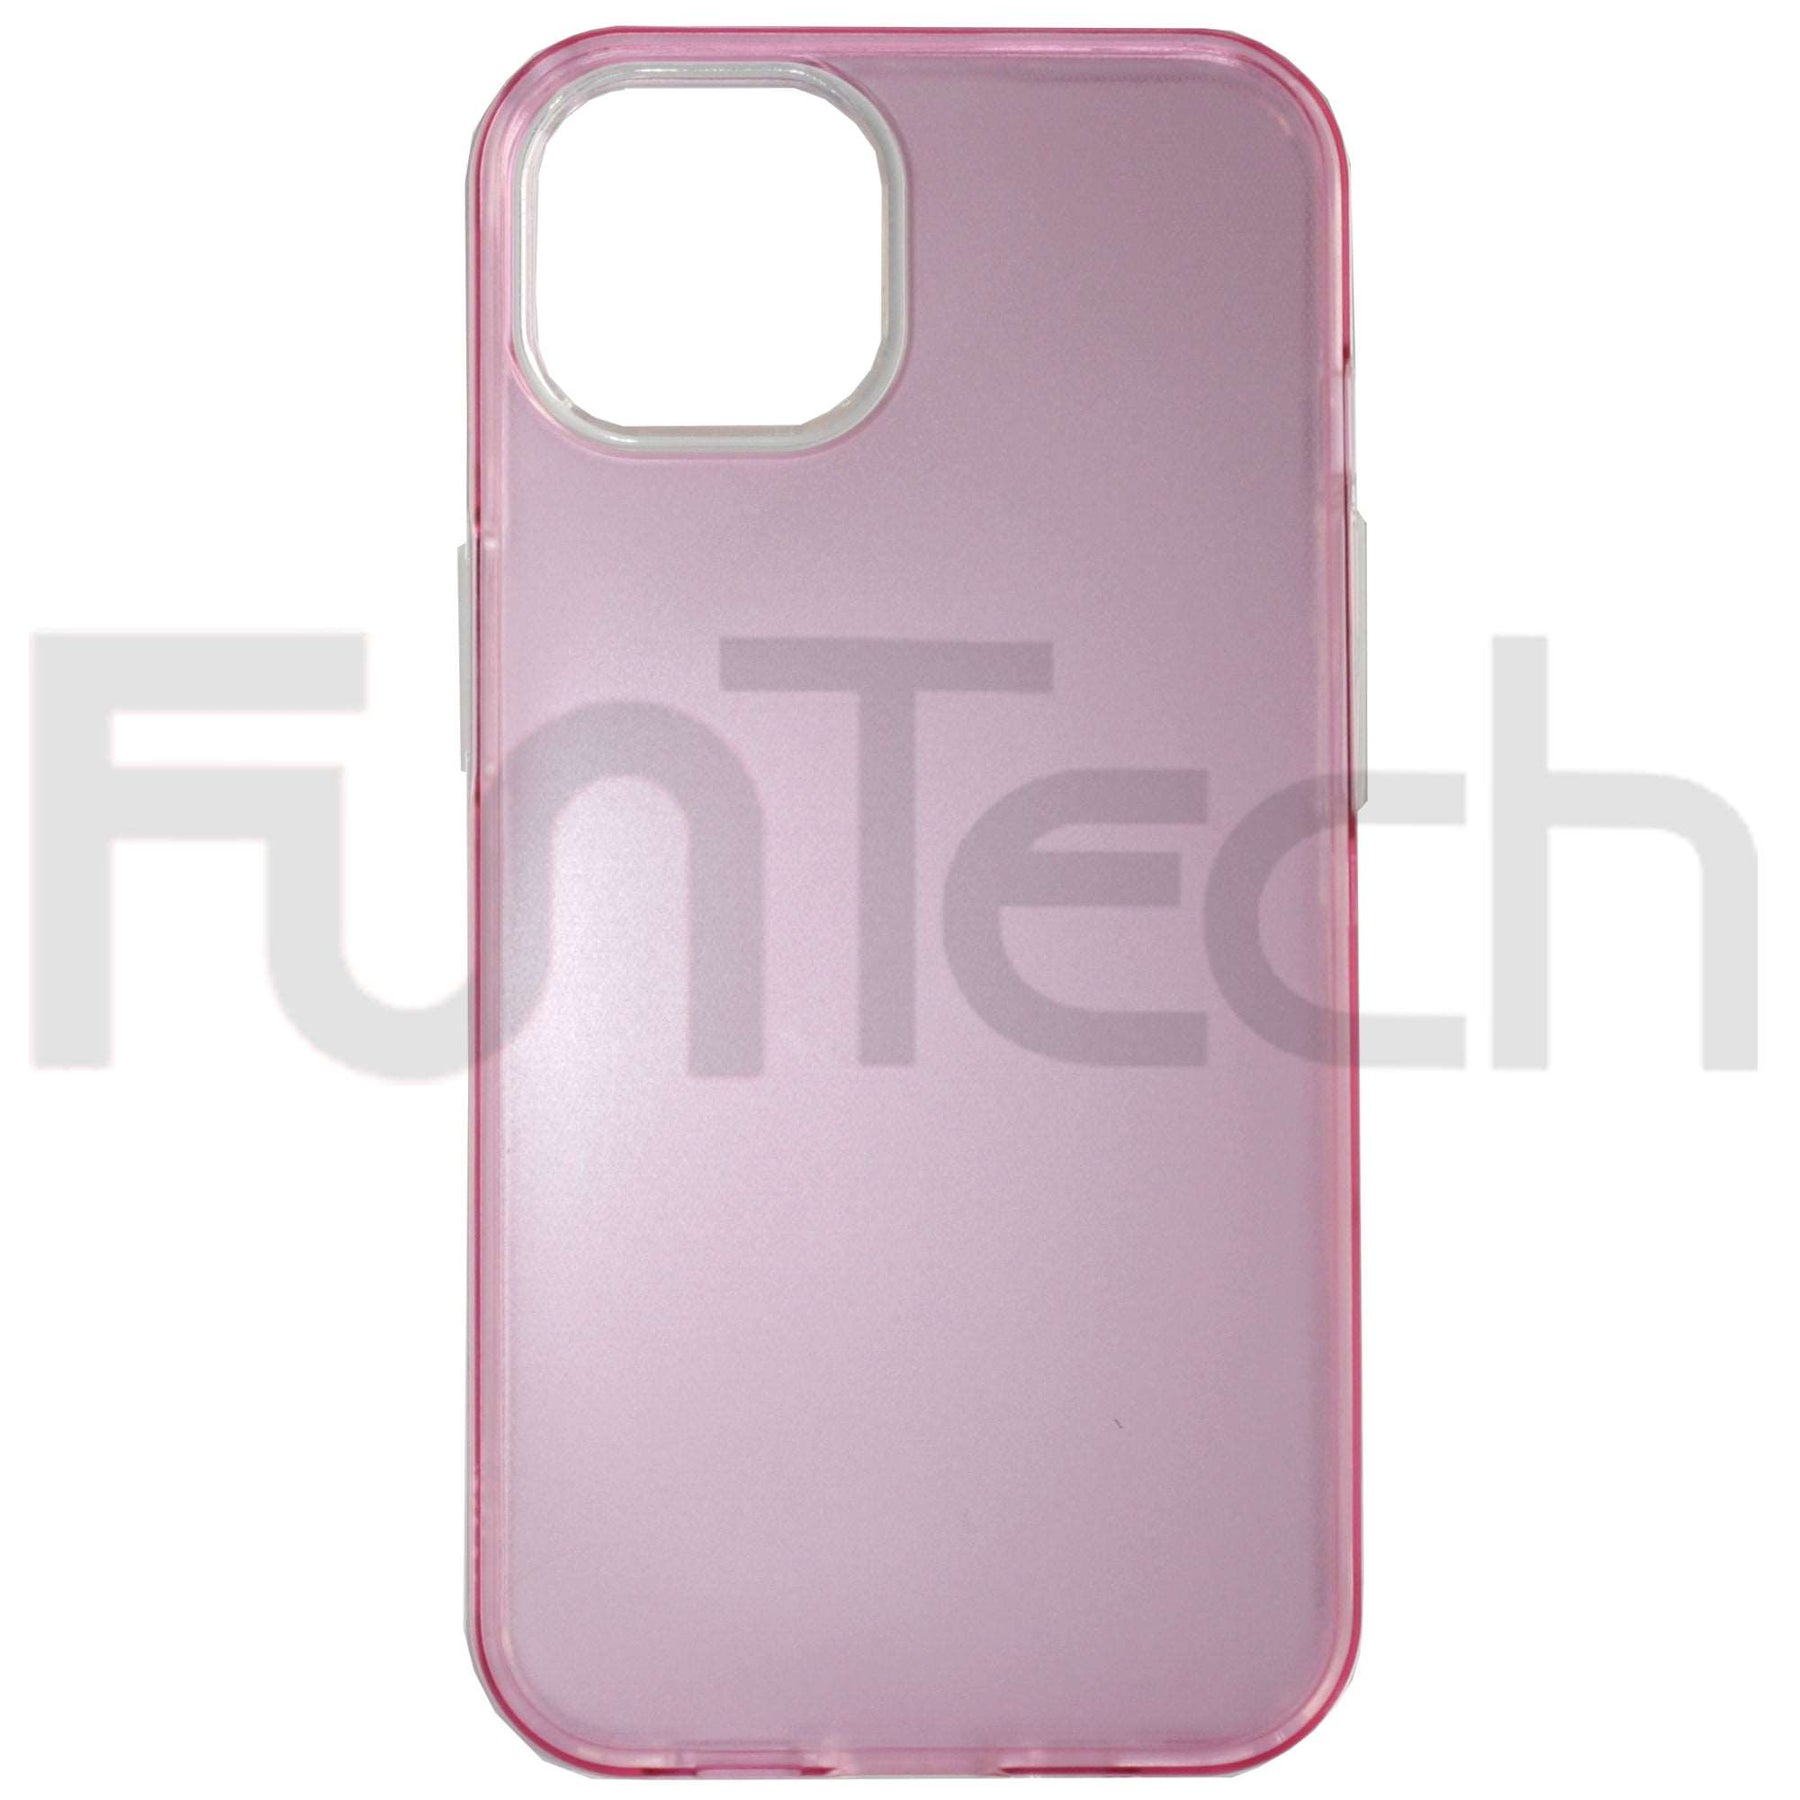 Apple iPhone 13 Pro, Phone Case, Color Pink.